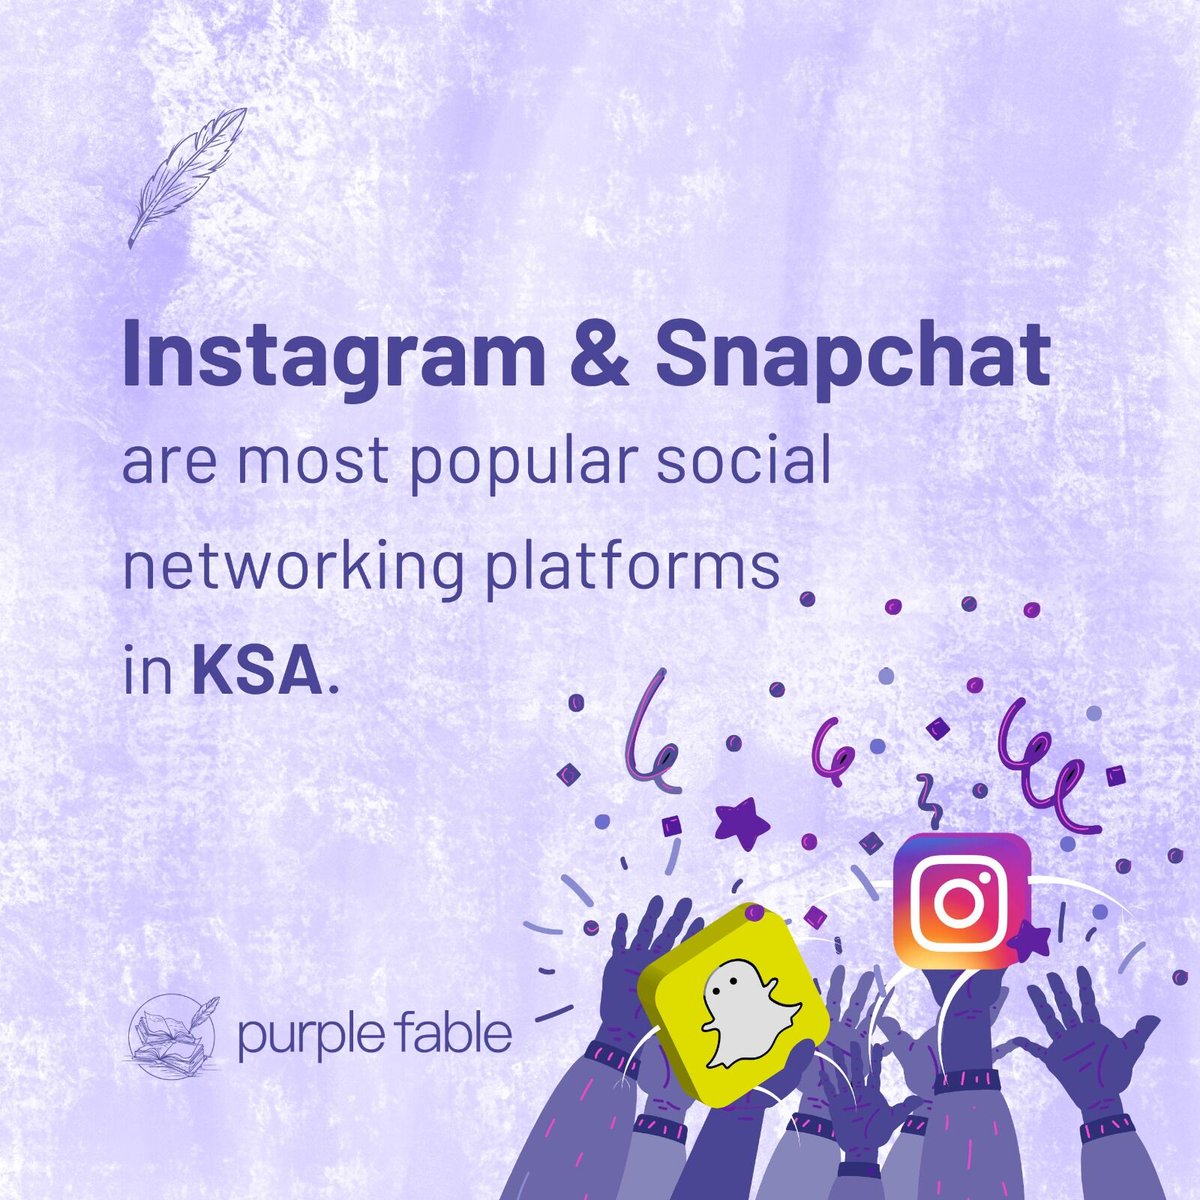 **King of Content**

Did you know Instagram & Snapchat reign supreme in KSA with over 70% of users on each platform?

What's your go-to platform for connecting with your audience? 

#SocialMediaMarketing #KSA #MarketingStats #PurpleFable #MarketingAgency